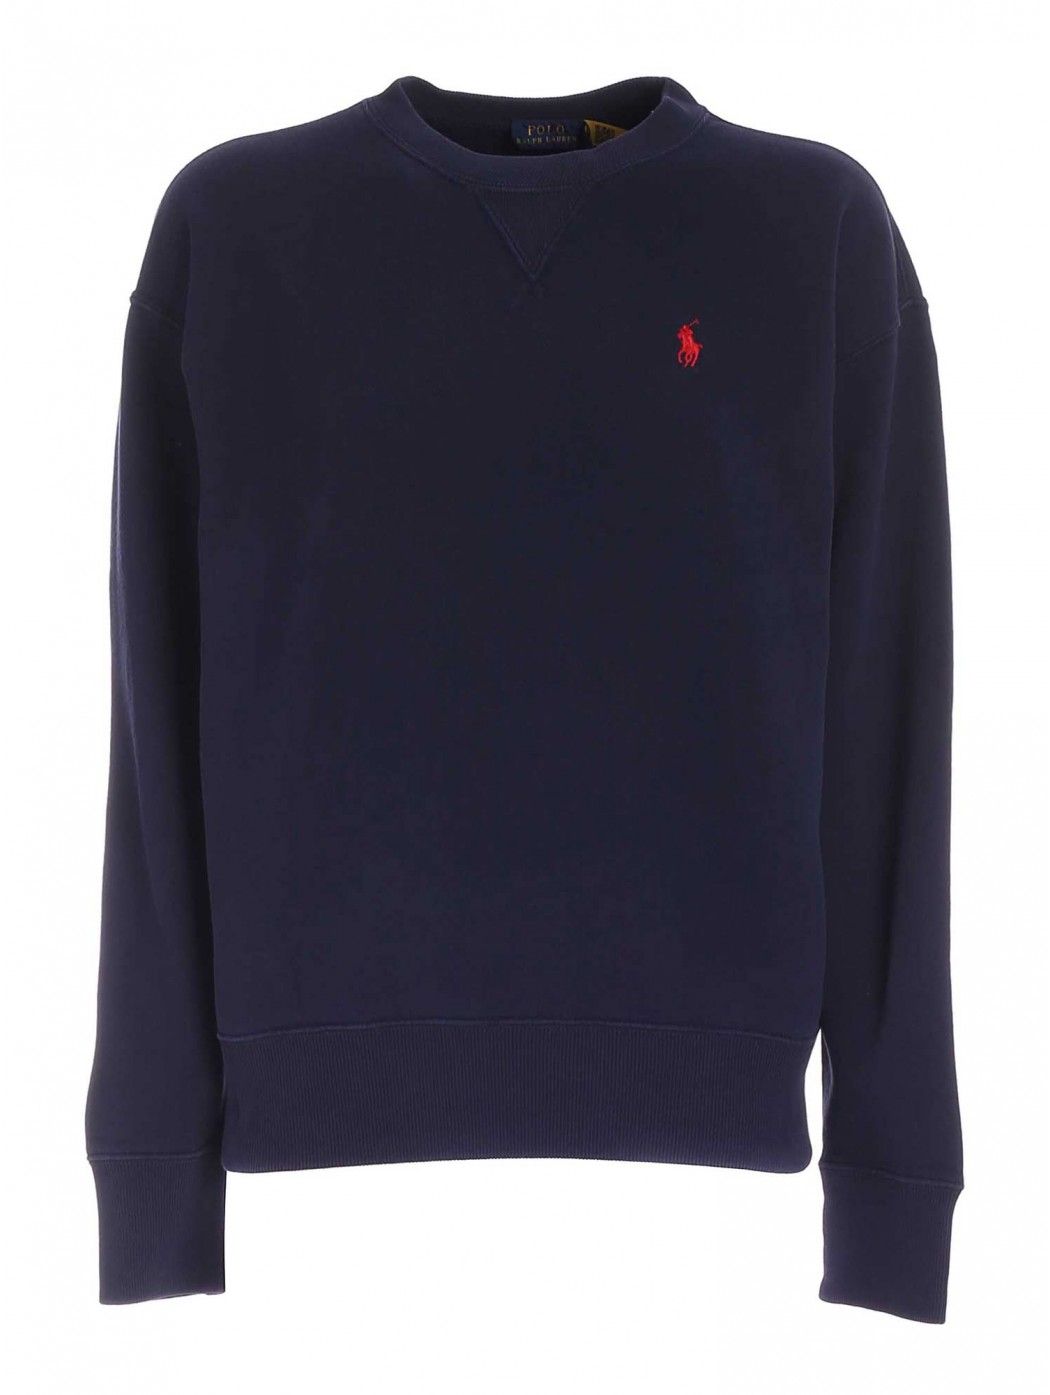 Cotton blend crewneck pullover with logo embroidery and ribbed edges.  Designer color name: Navy POLO RALPH LAUREN DONNA